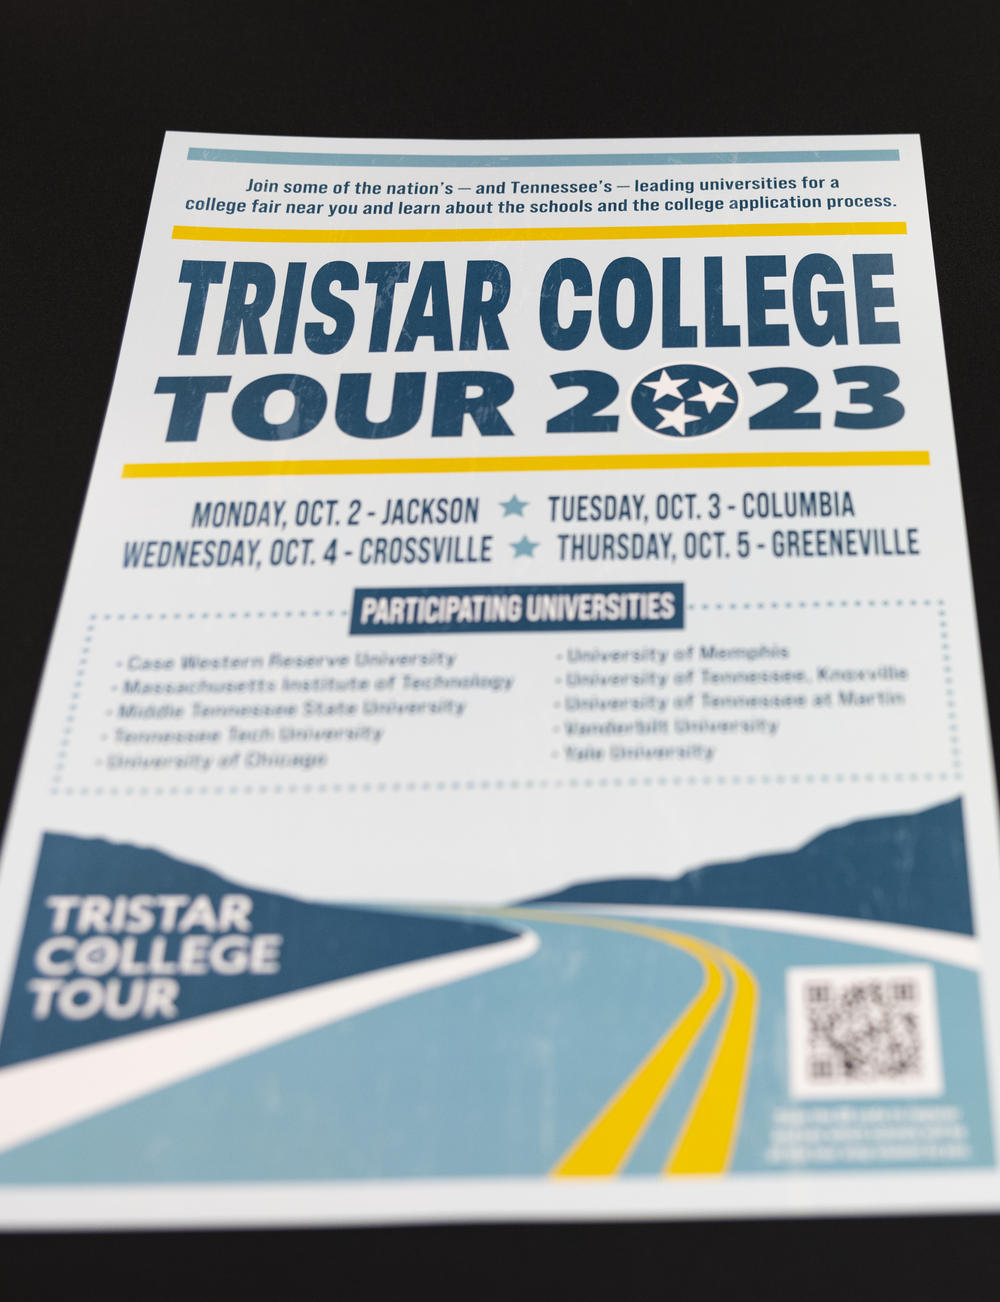 A poster for the Tristar College Tour at Stone Memorial High School in Crossville, Tenn.